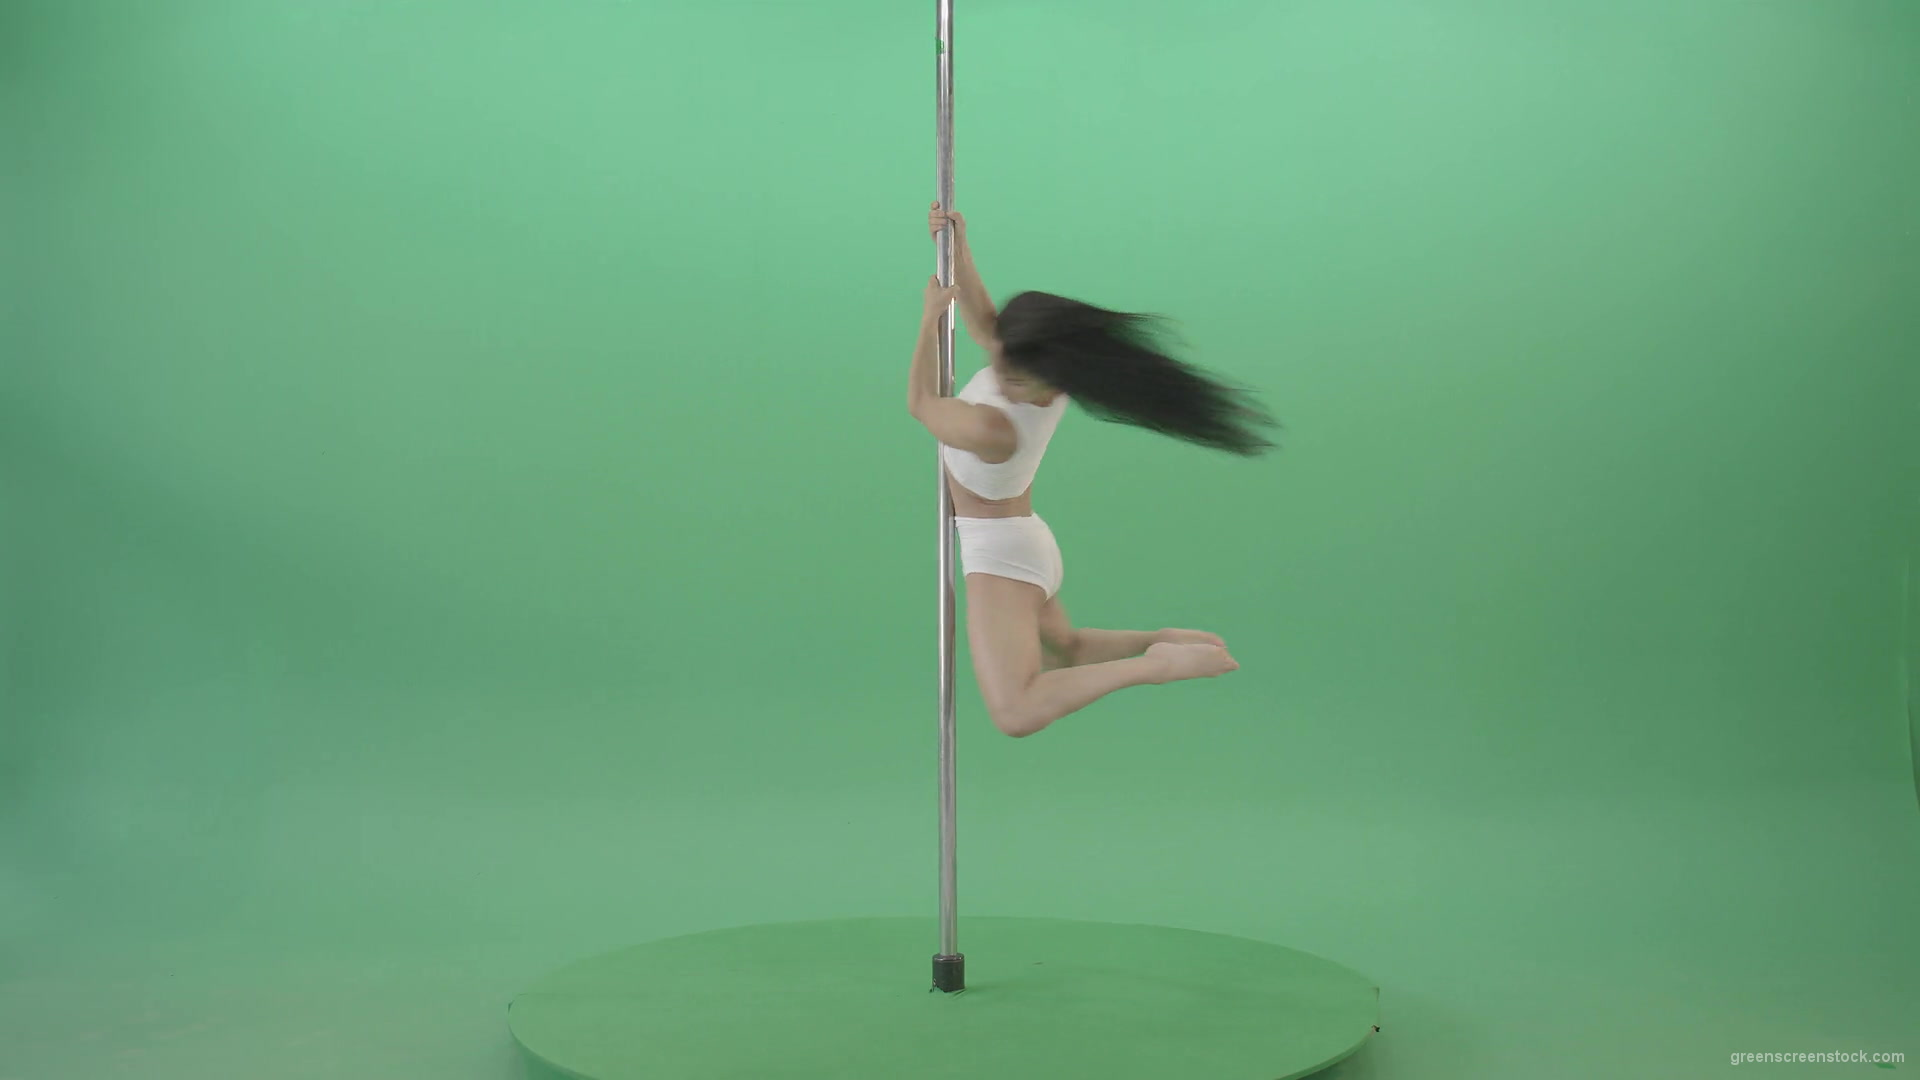 Green-Screen-Woman-spinning-gracefully-on-pole-dance-Video-Footage-1920_005 Green Screen Stock